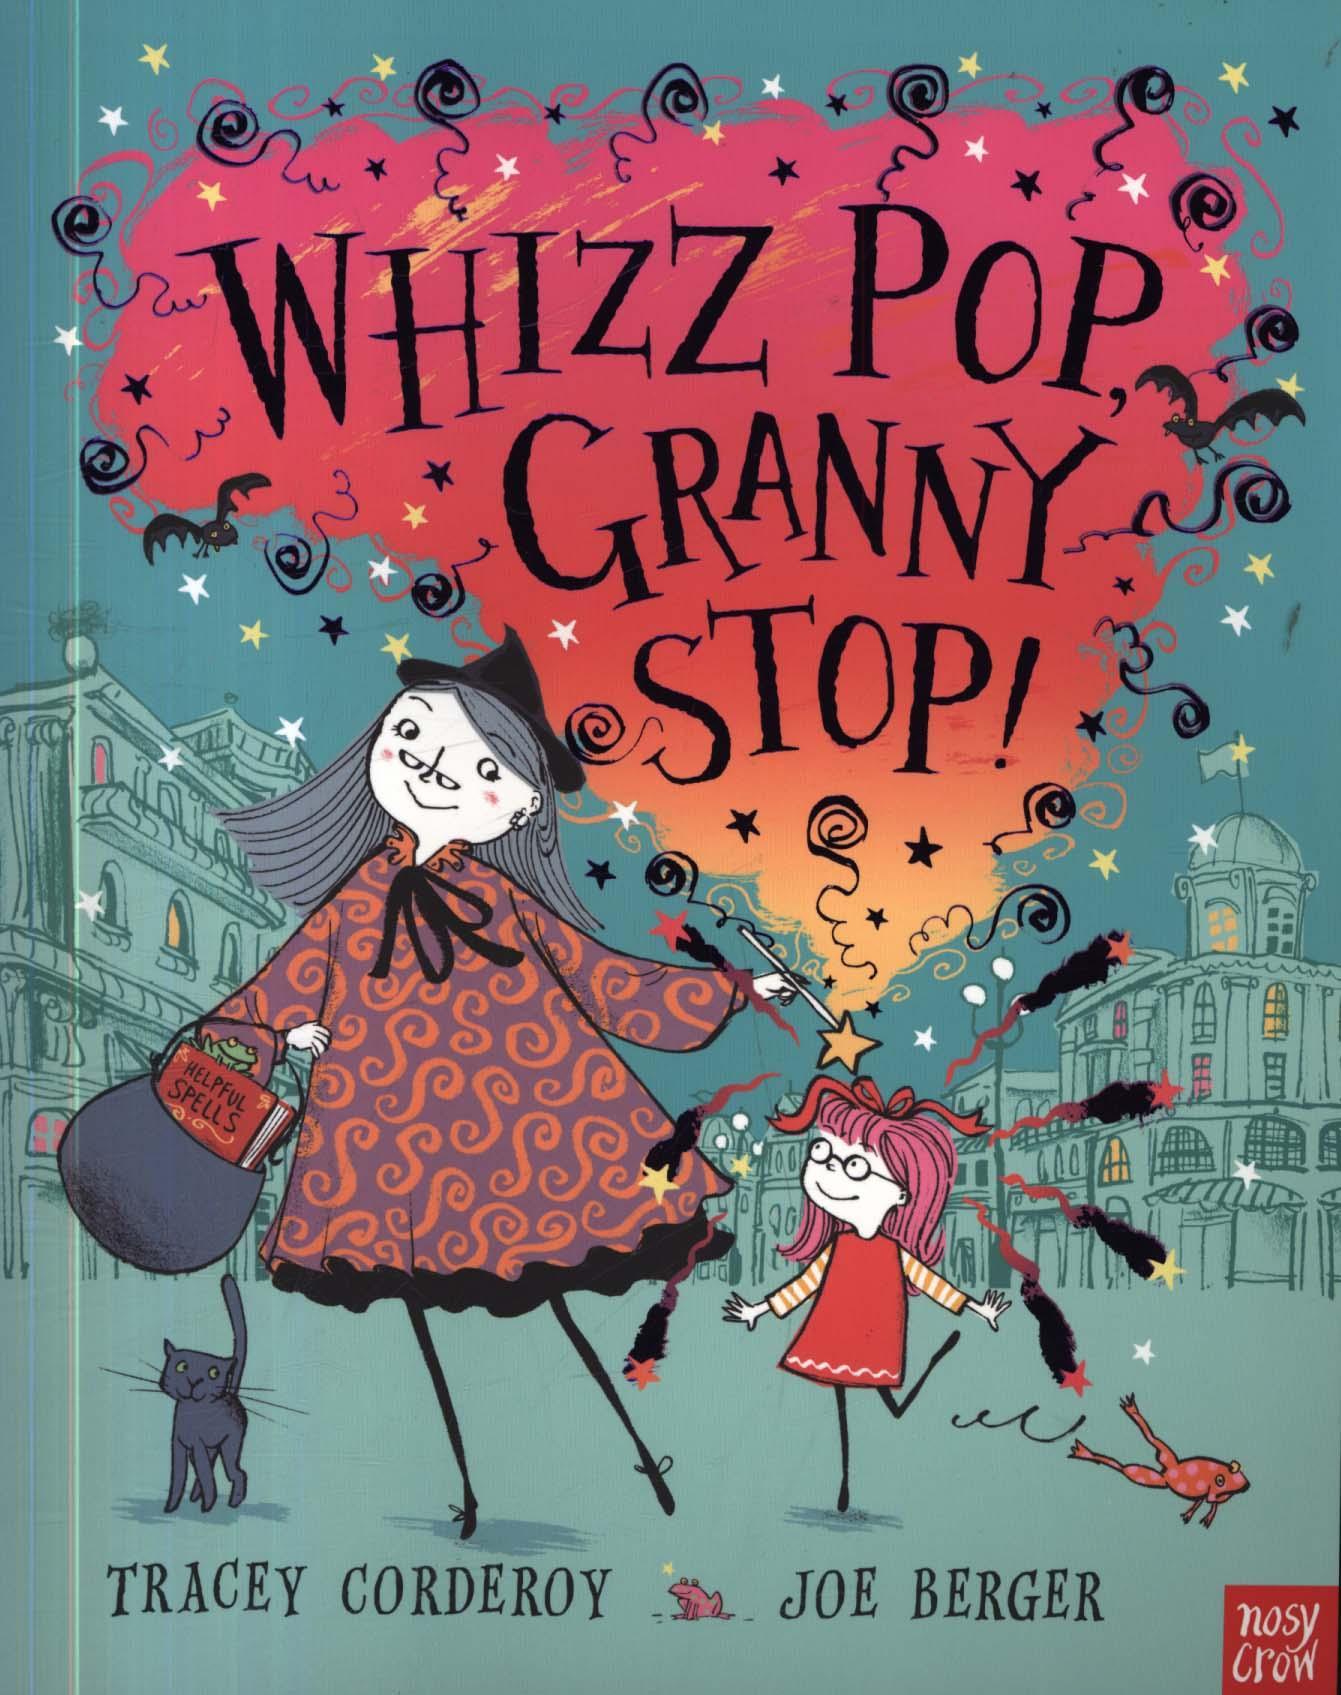 Whizz! Pop! Granny, Stop! - Tracey Corderoy